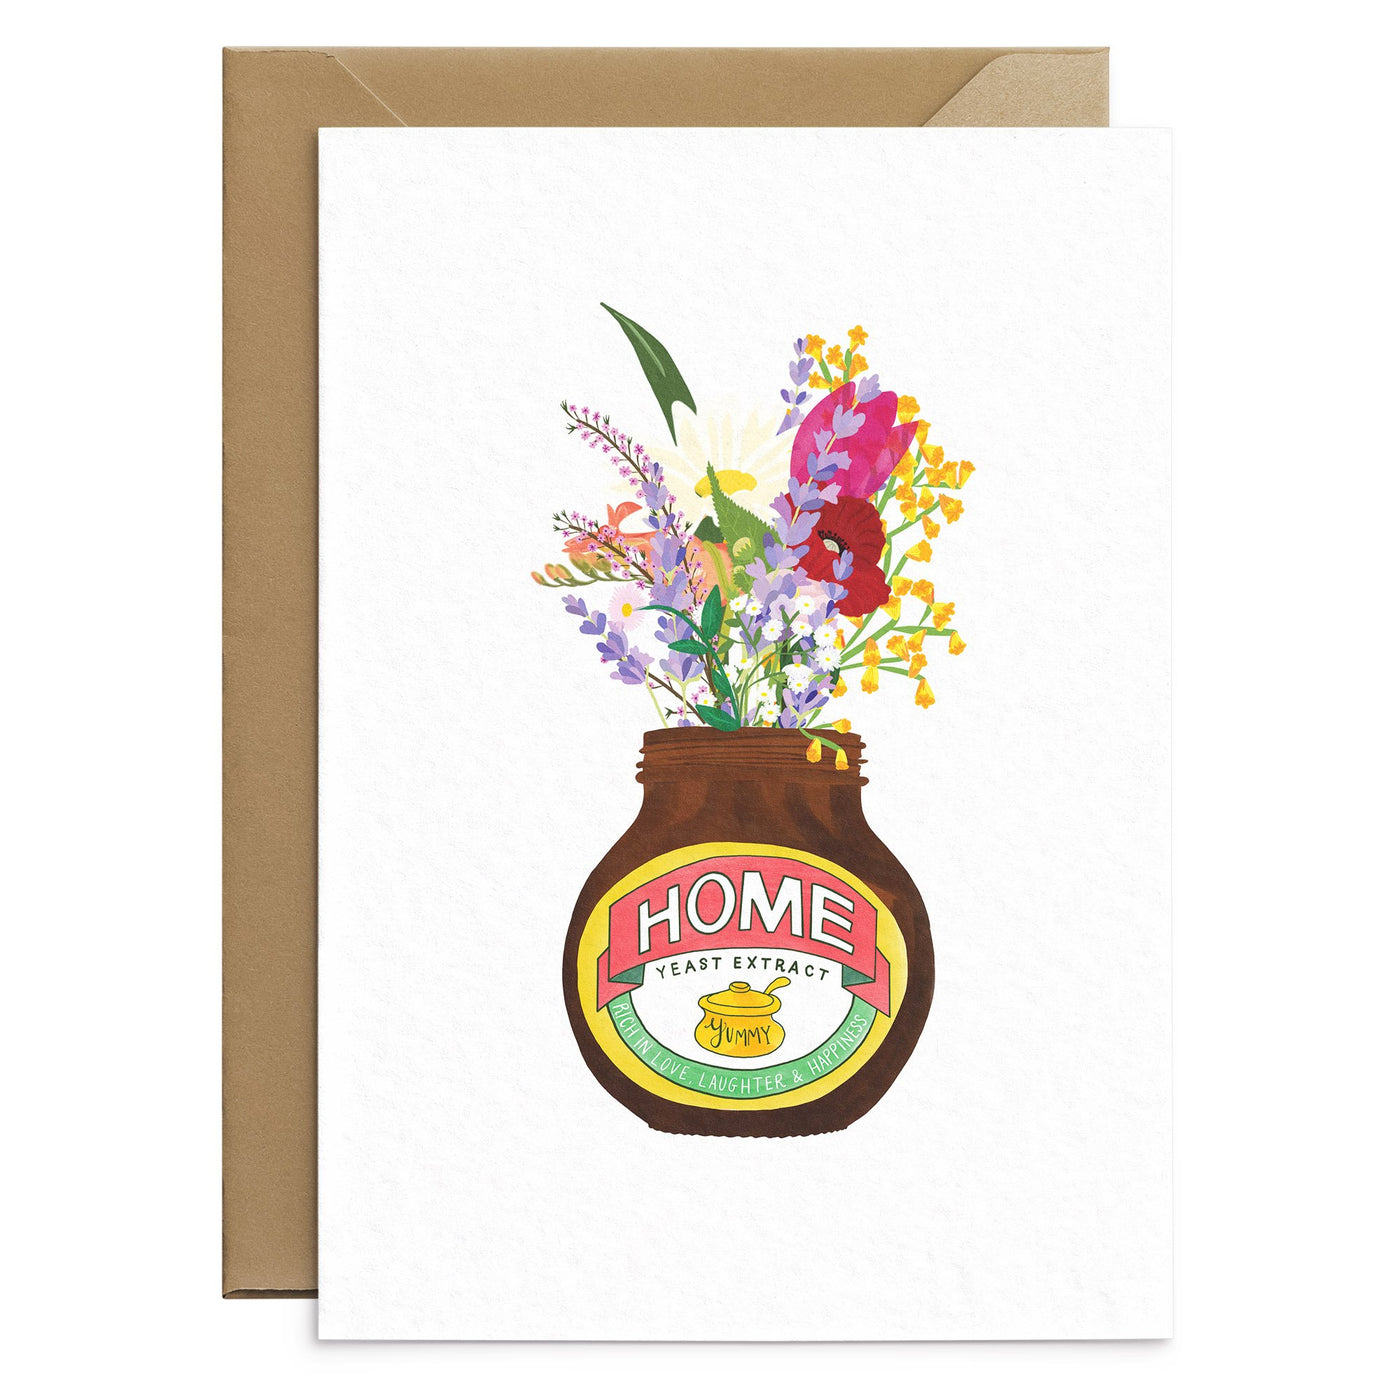 Home Yeast Extract Jar & Flowers Card - Poppins & Co.